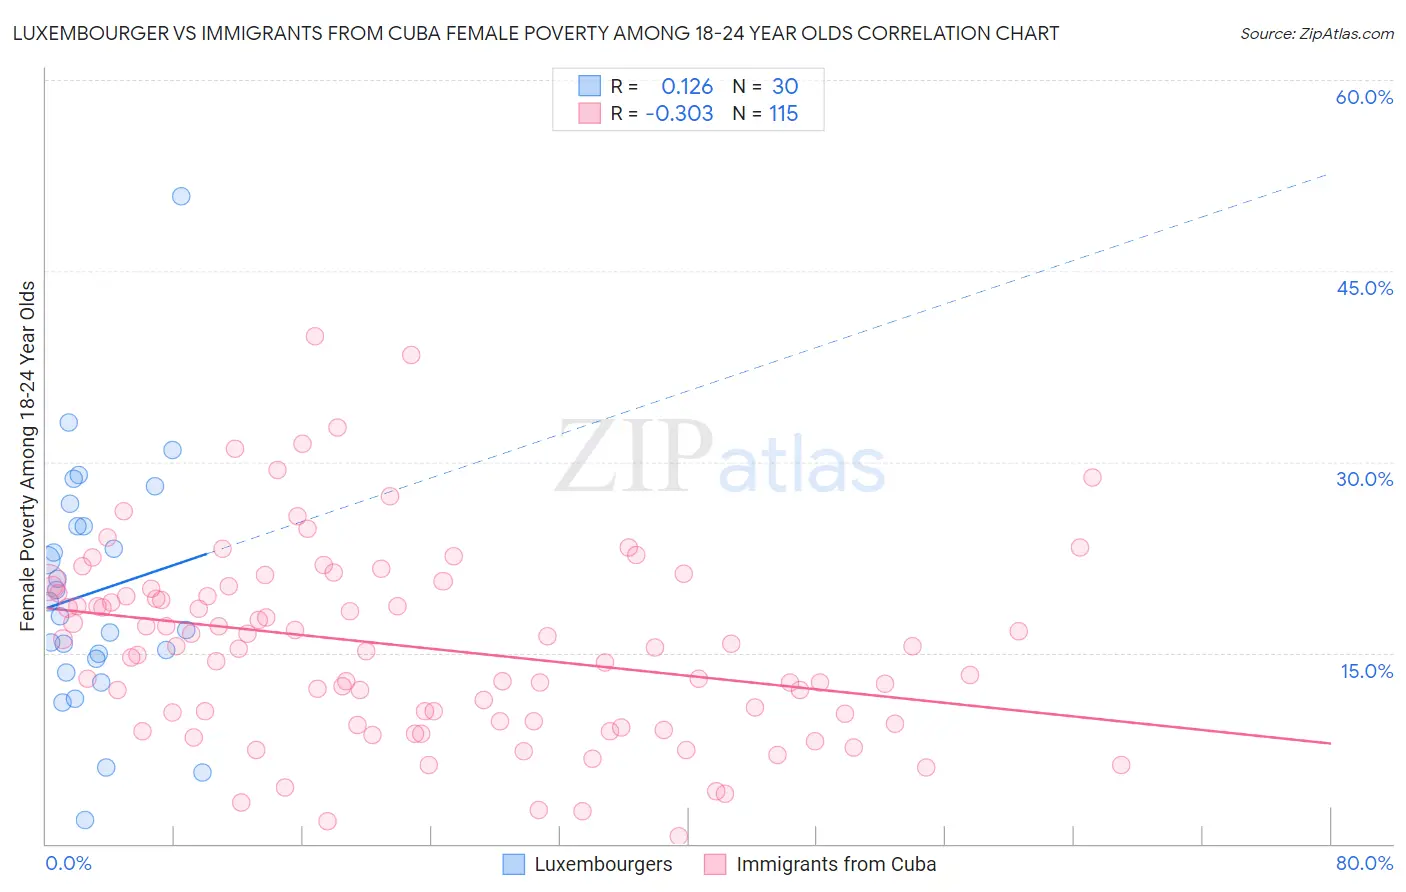 Luxembourger vs Immigrants from Cuba Female Poverty Among 18-24 Year Olds